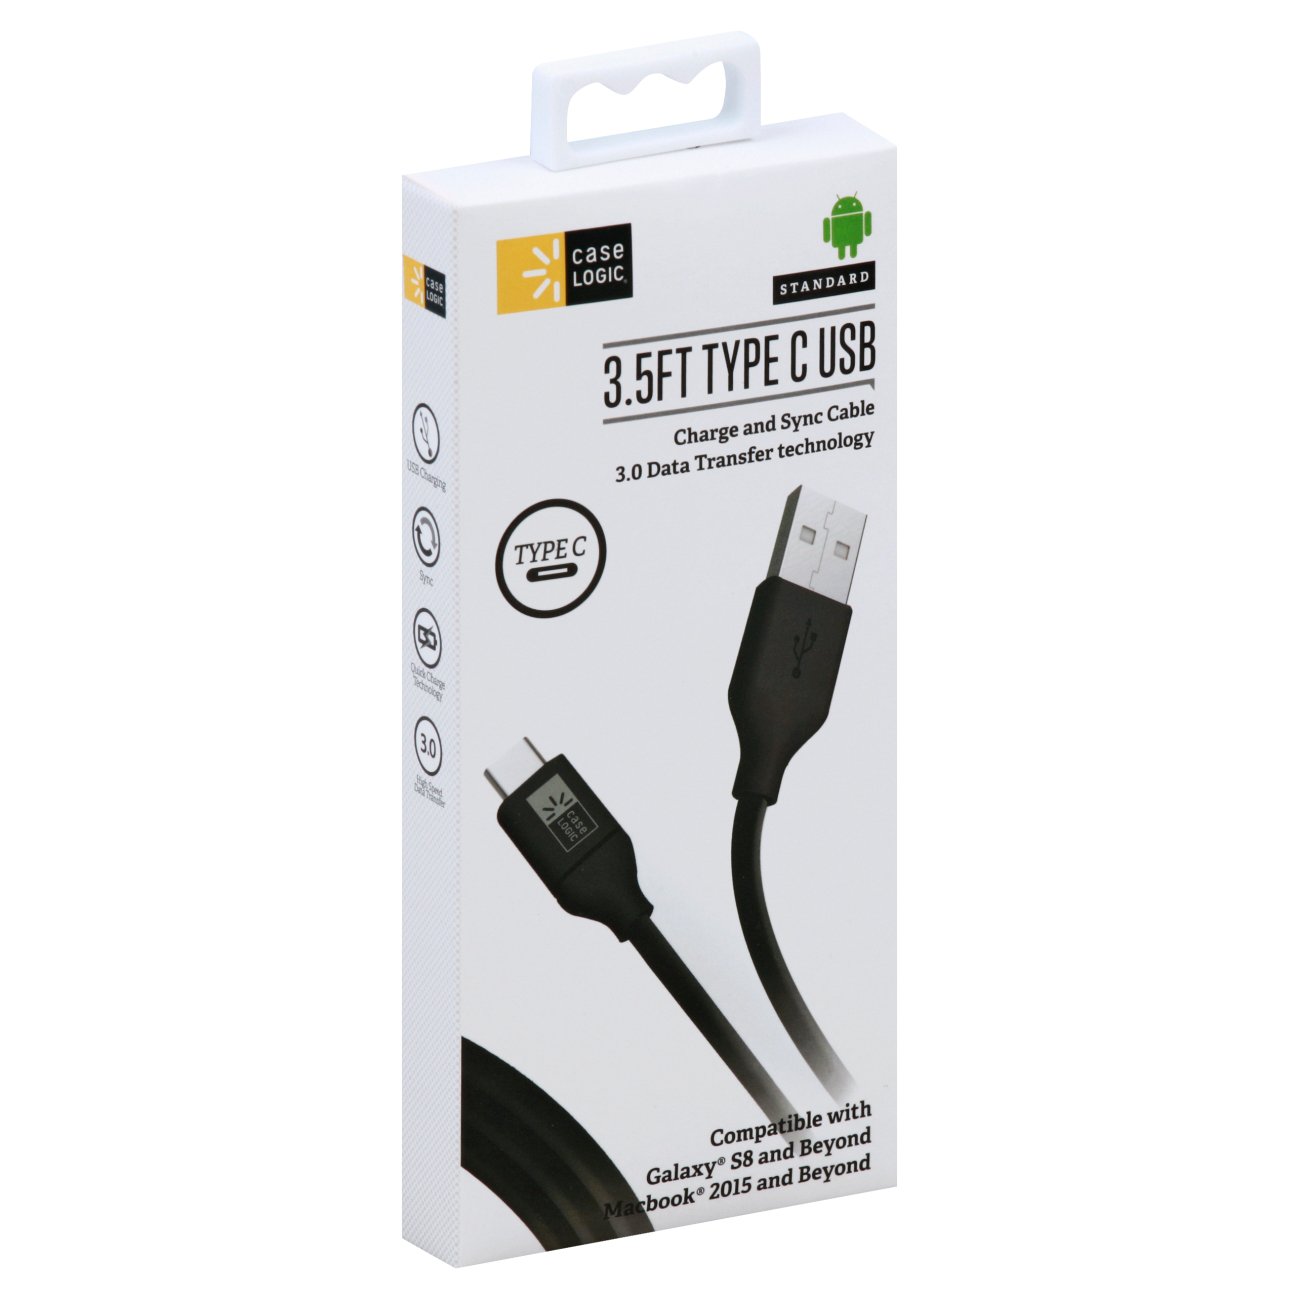 Case Logic USB 3.0 Speed Cable - Shop Phone at H-E-B